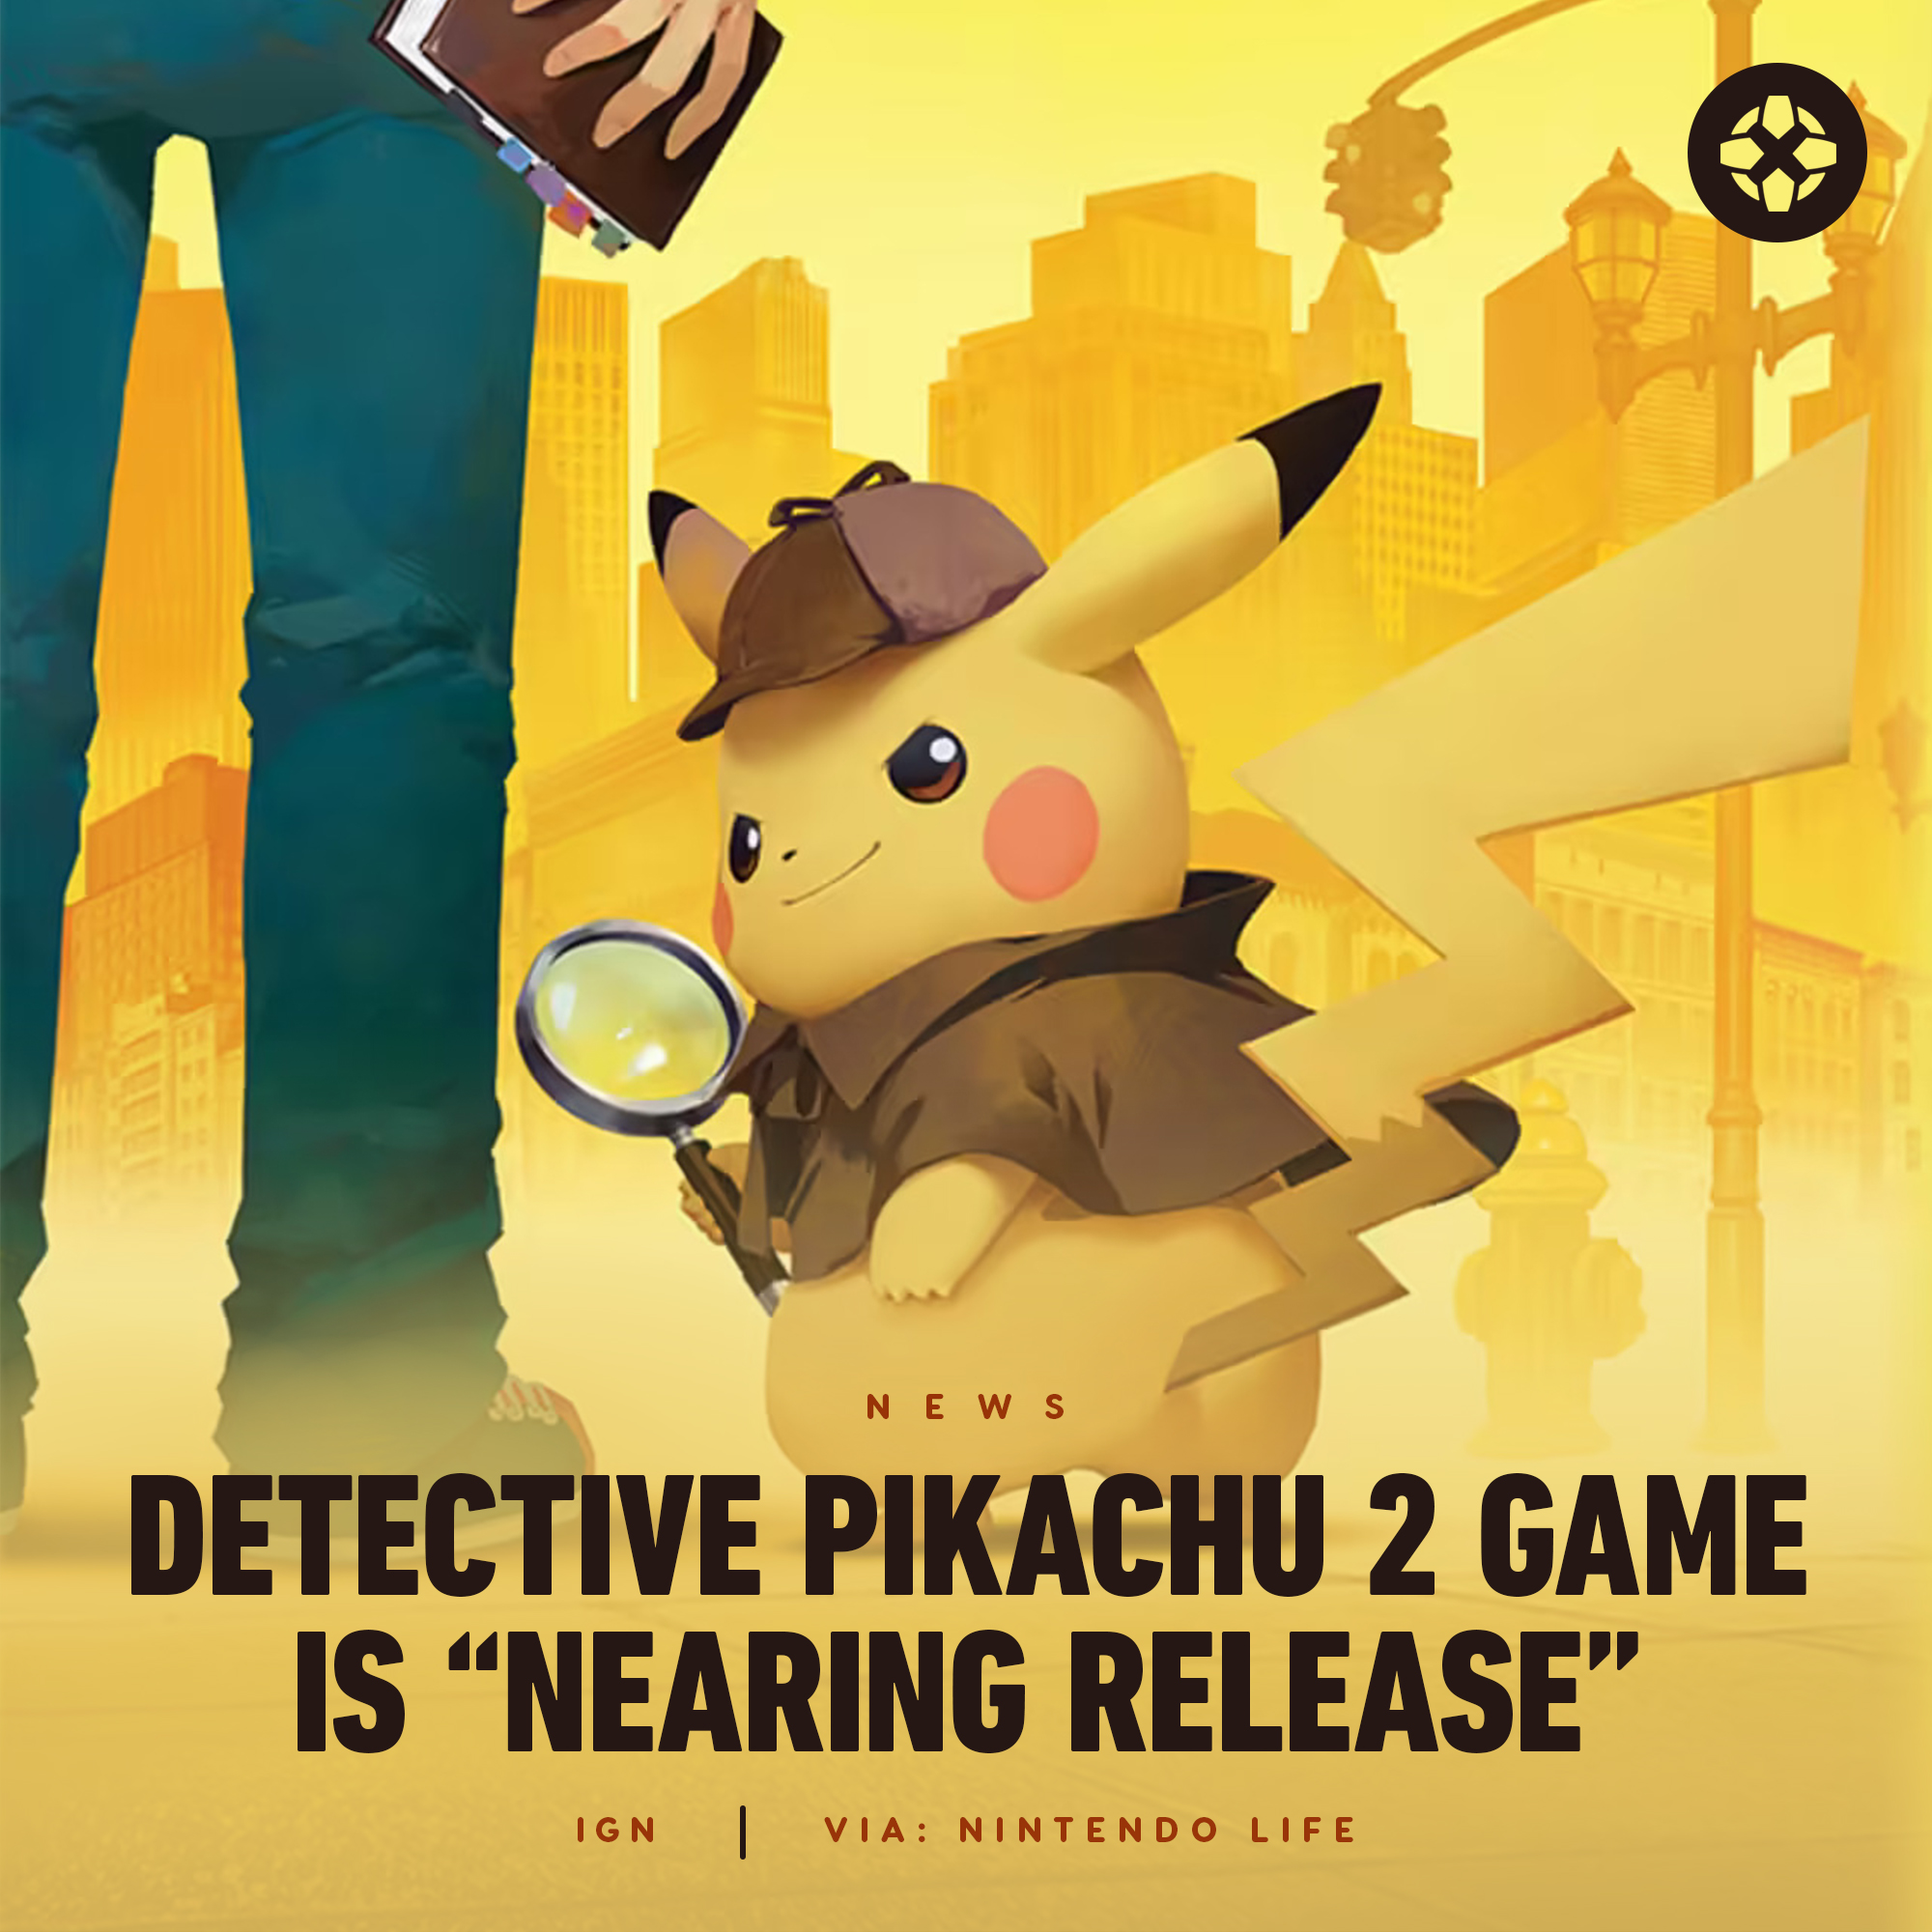 IGN on Twitter: "The Nintendo Switch sequel the 3DS's Detective Pikachu game is "nearing according to developer working on it. https://t.co/lrCtxjMsm5 https://t.co/ymhceymEs6" / Twitter